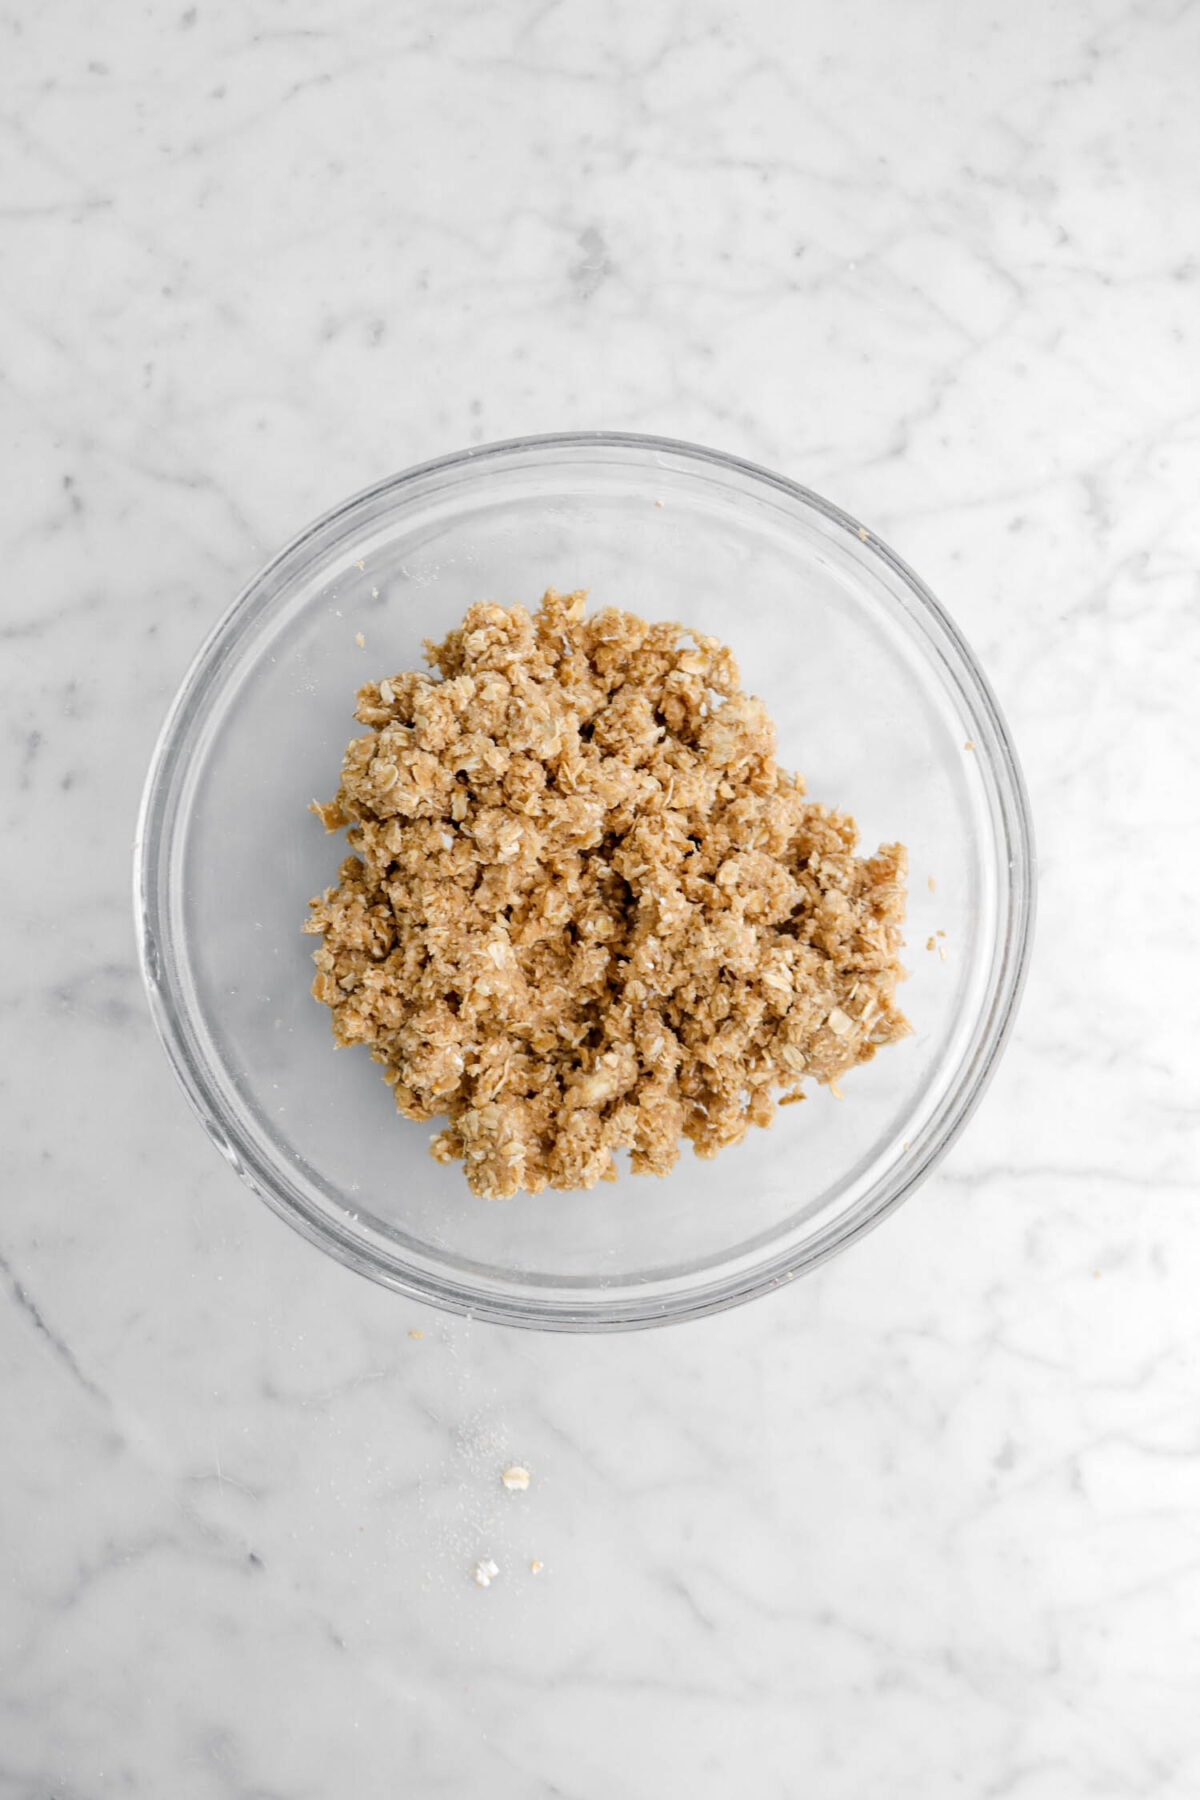 crumble topping in glass bowl.